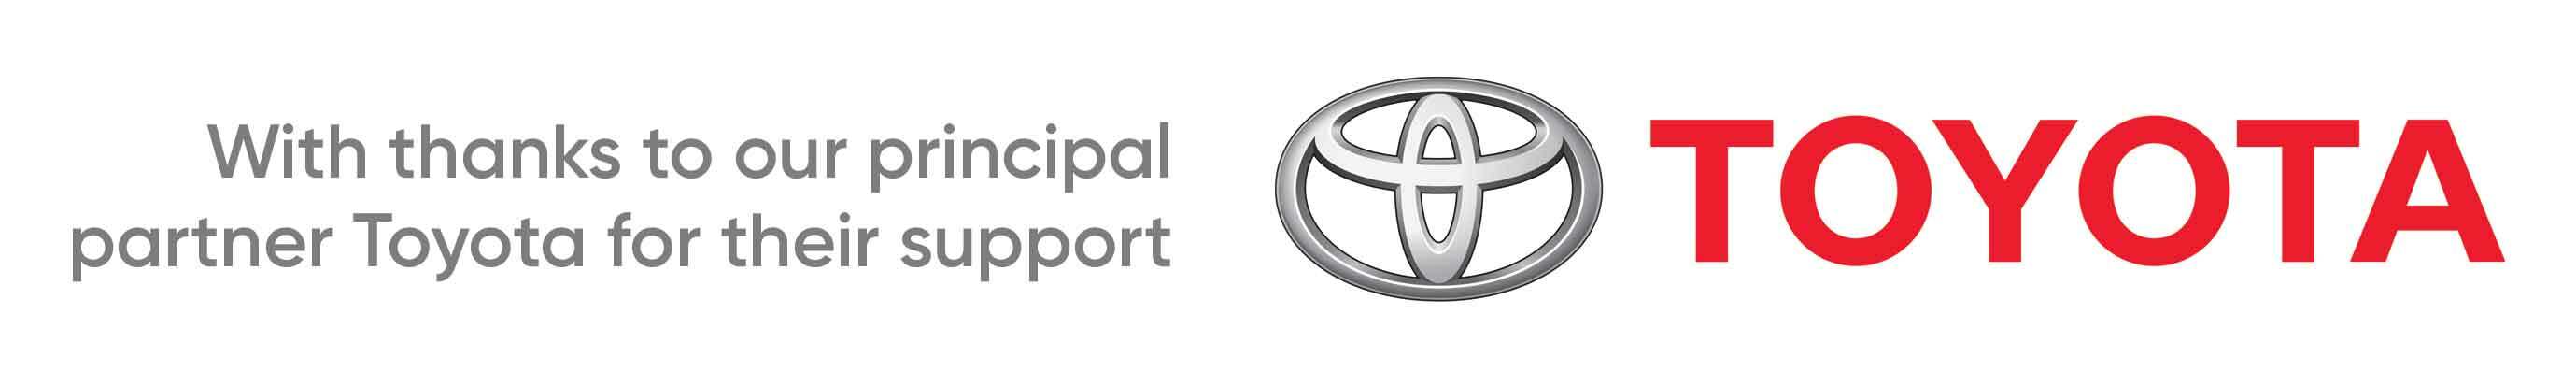 With thanks to our principal partner Toyota for their support